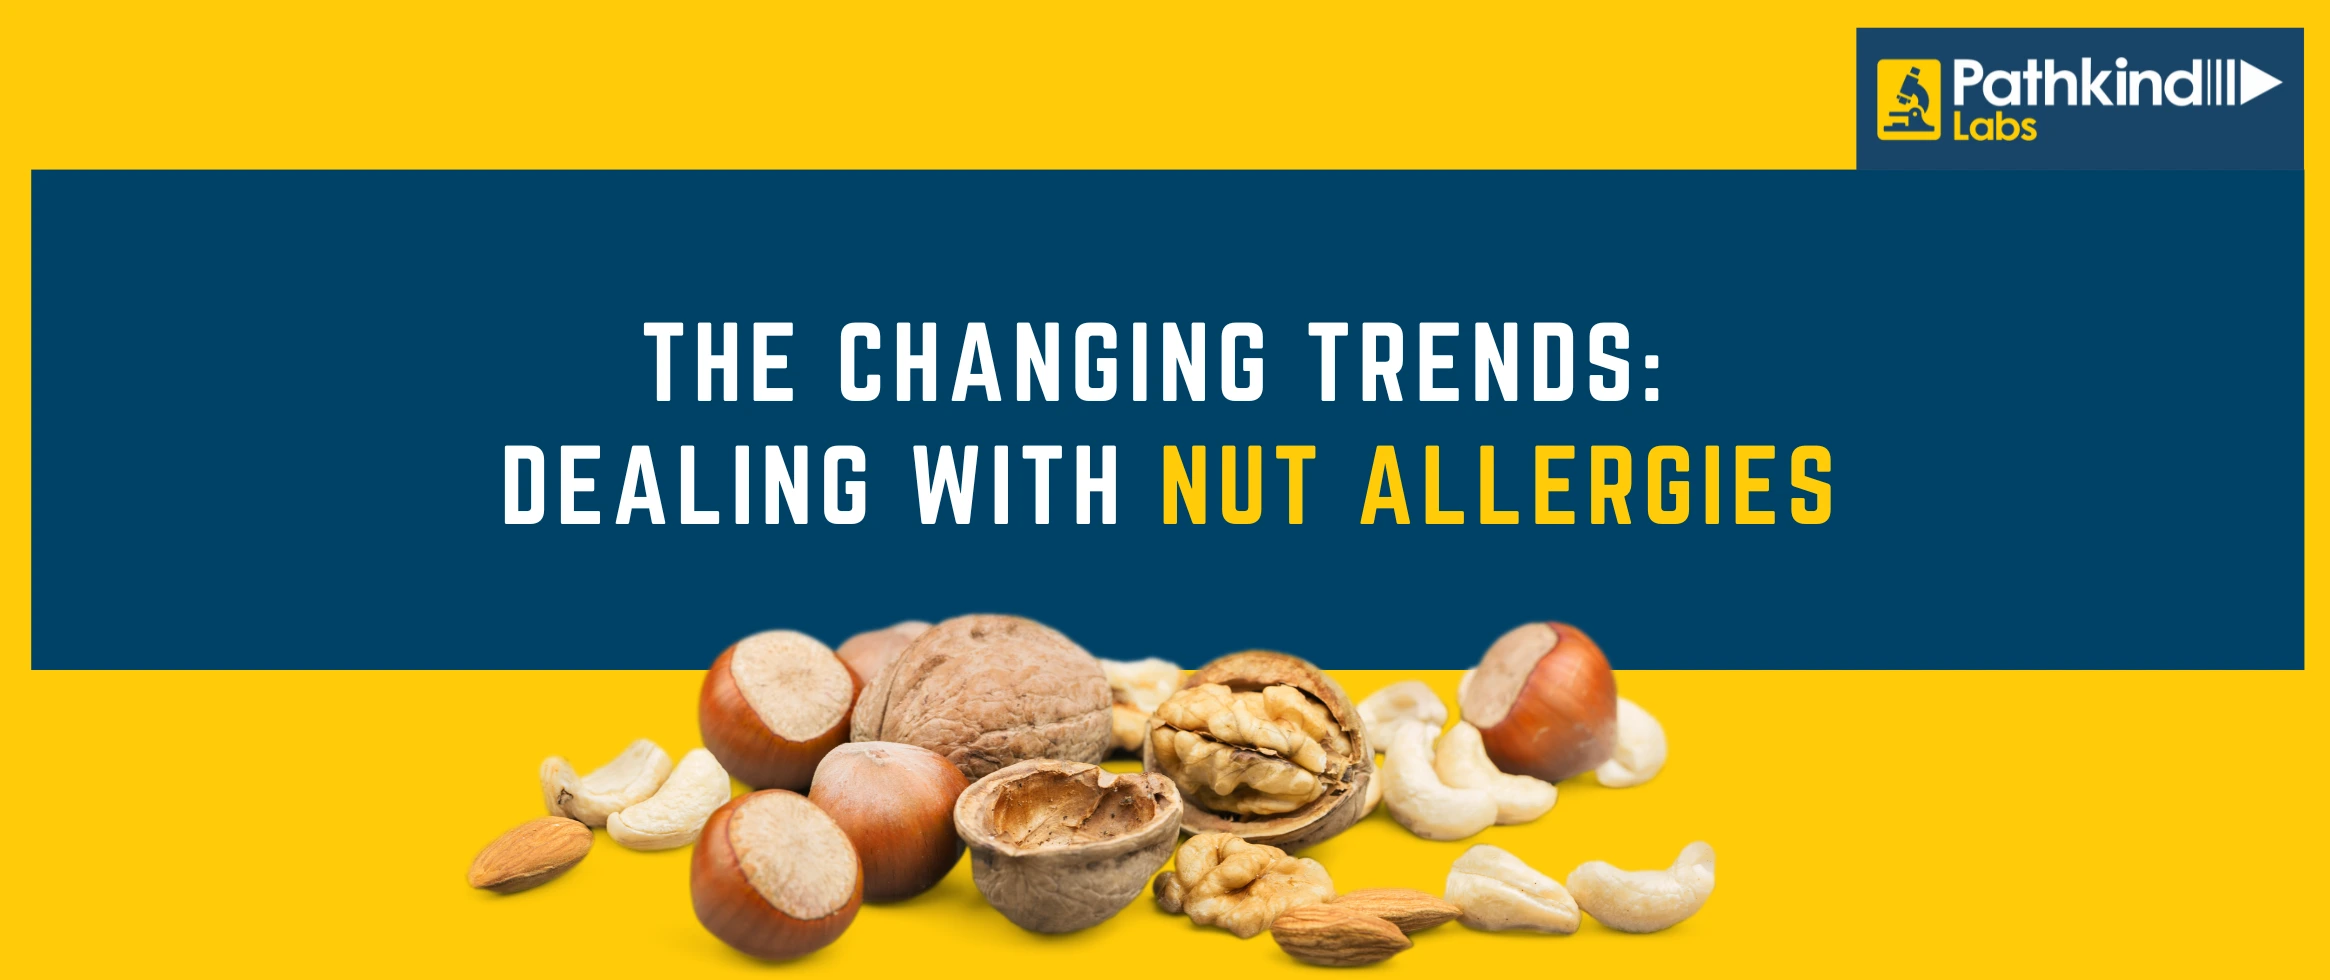 Dealing with Nut Allergies